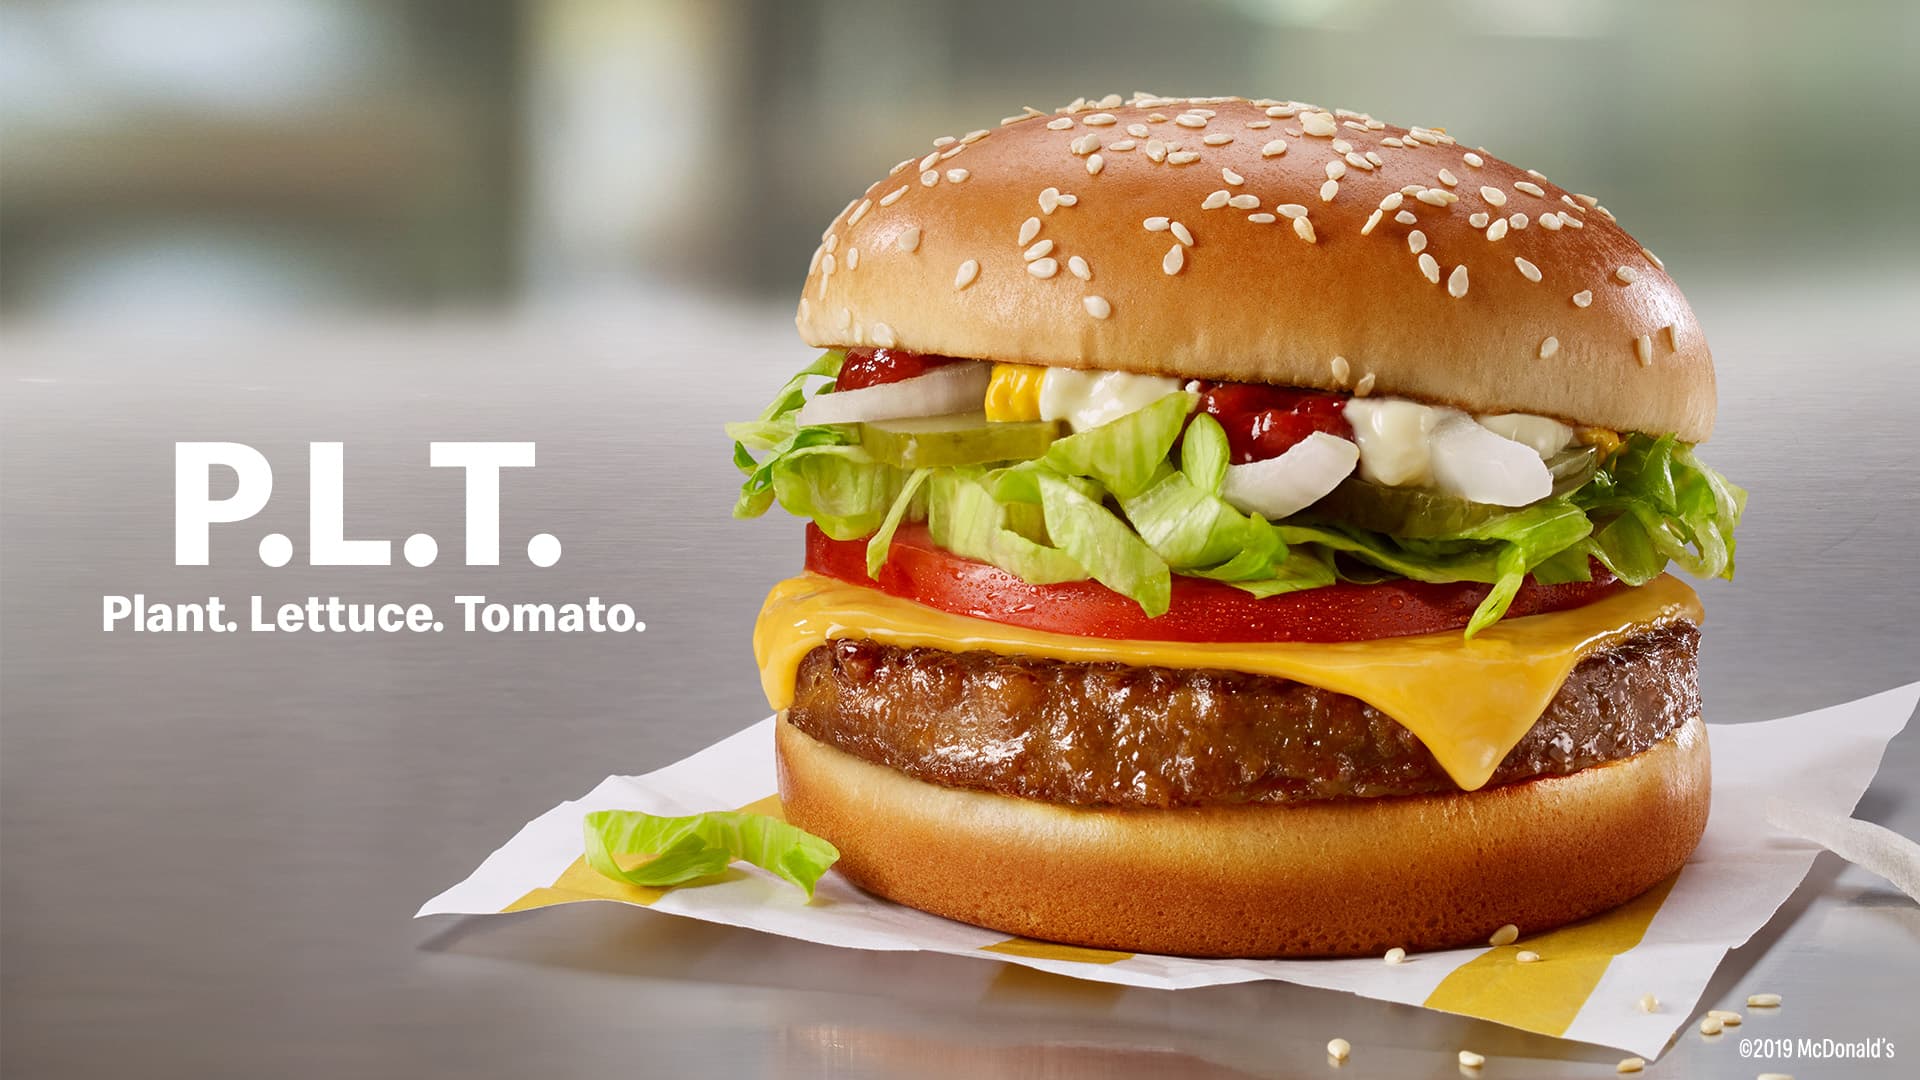 Best Fast Food Burger 2021 McDonald's launches plant based burger war showdown with Burger King